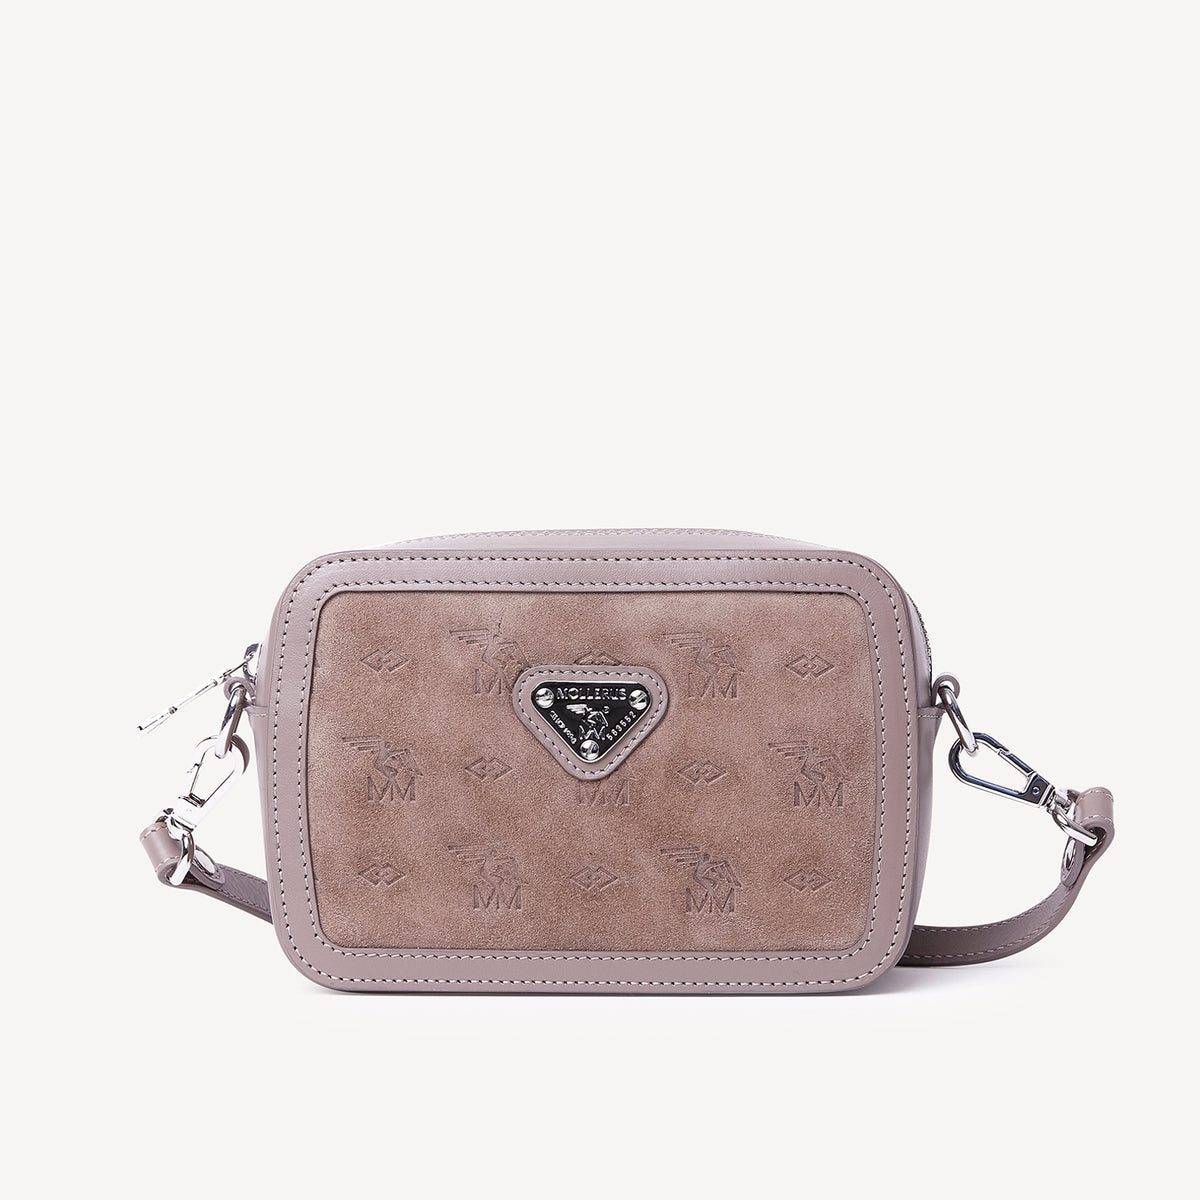 INWIL | Schultertasche Velour taupe grau/silber - frontal